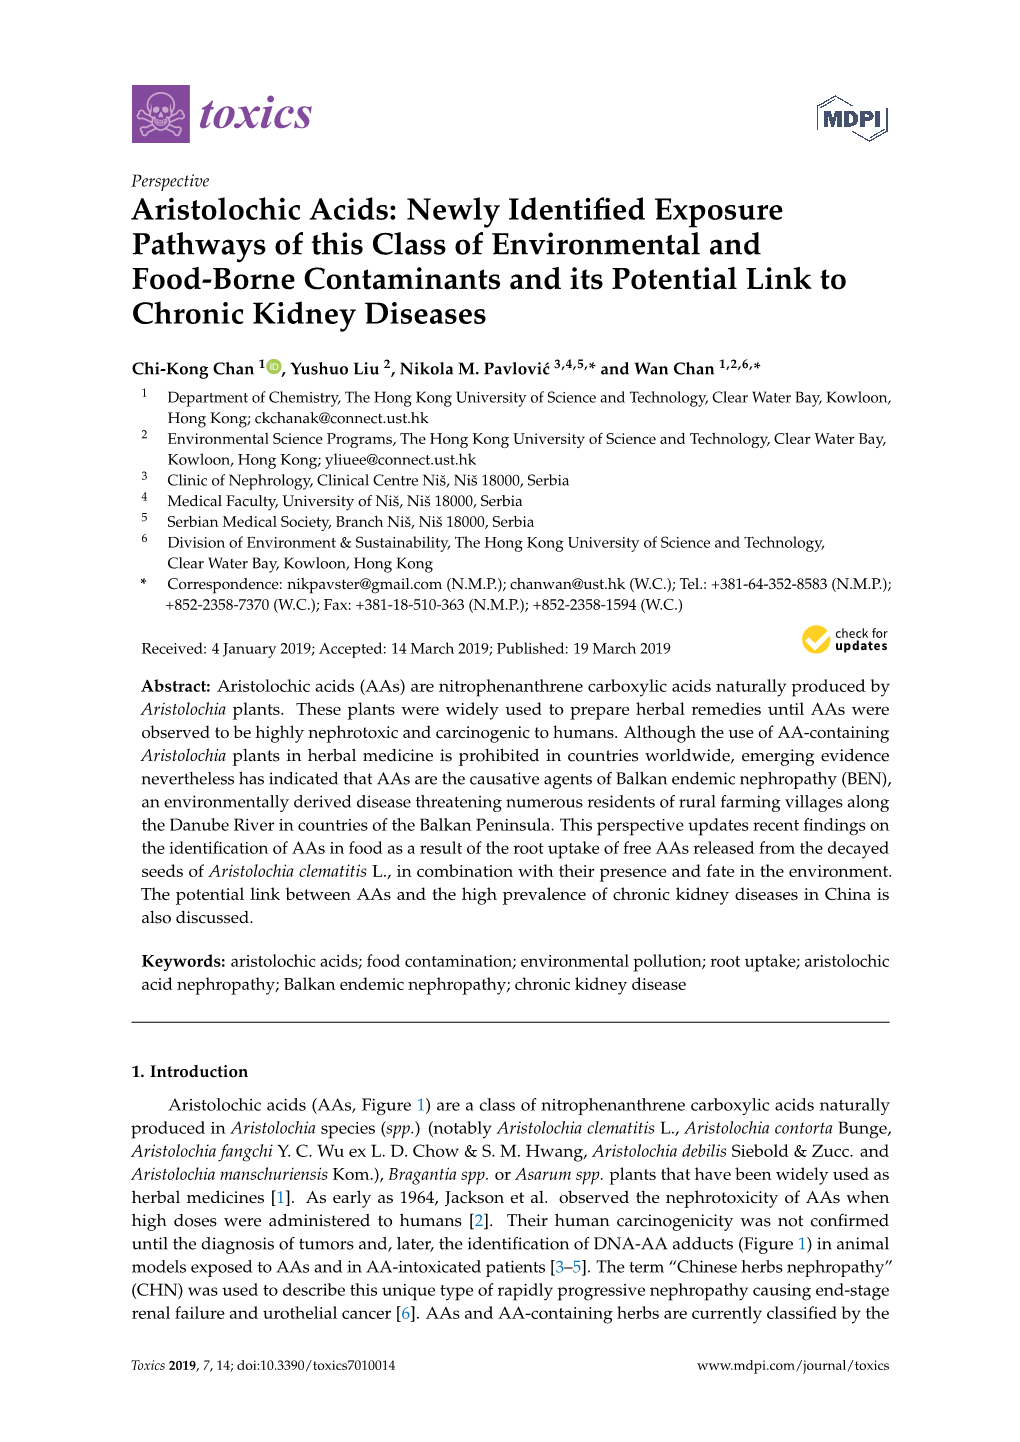 Aristolochic Acids: Newly Identified Exposure Pathways of This Class of Environmental and Food-Borne Contaminants and Its Potent